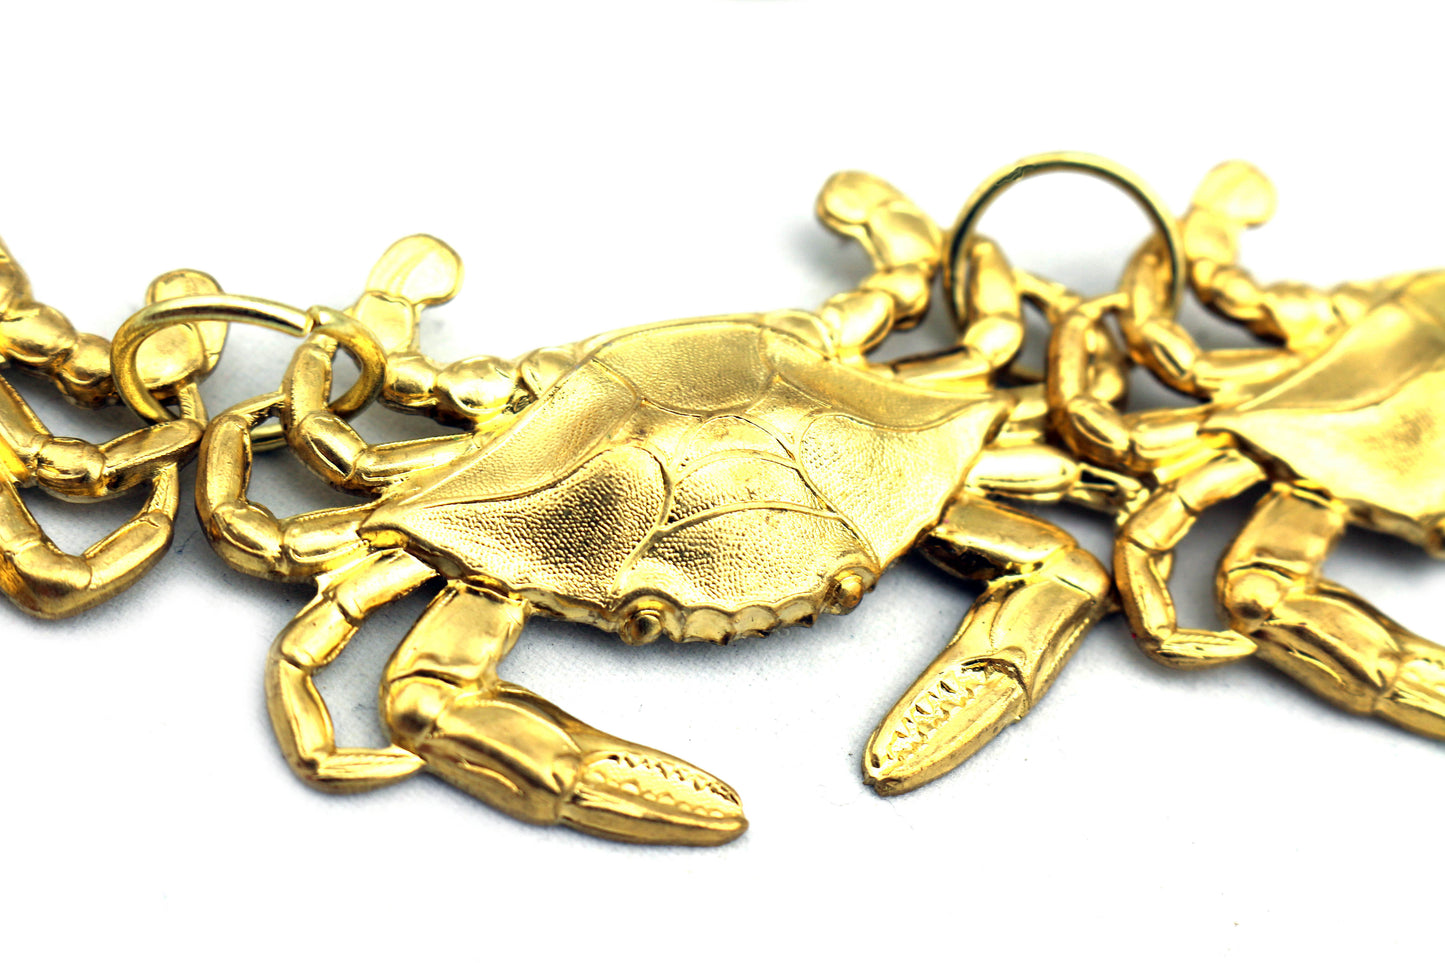 Crab Collar Necklace USA Made Brass highly detailed 18 inches adjustable Gay Isber-Gay Isber Designs